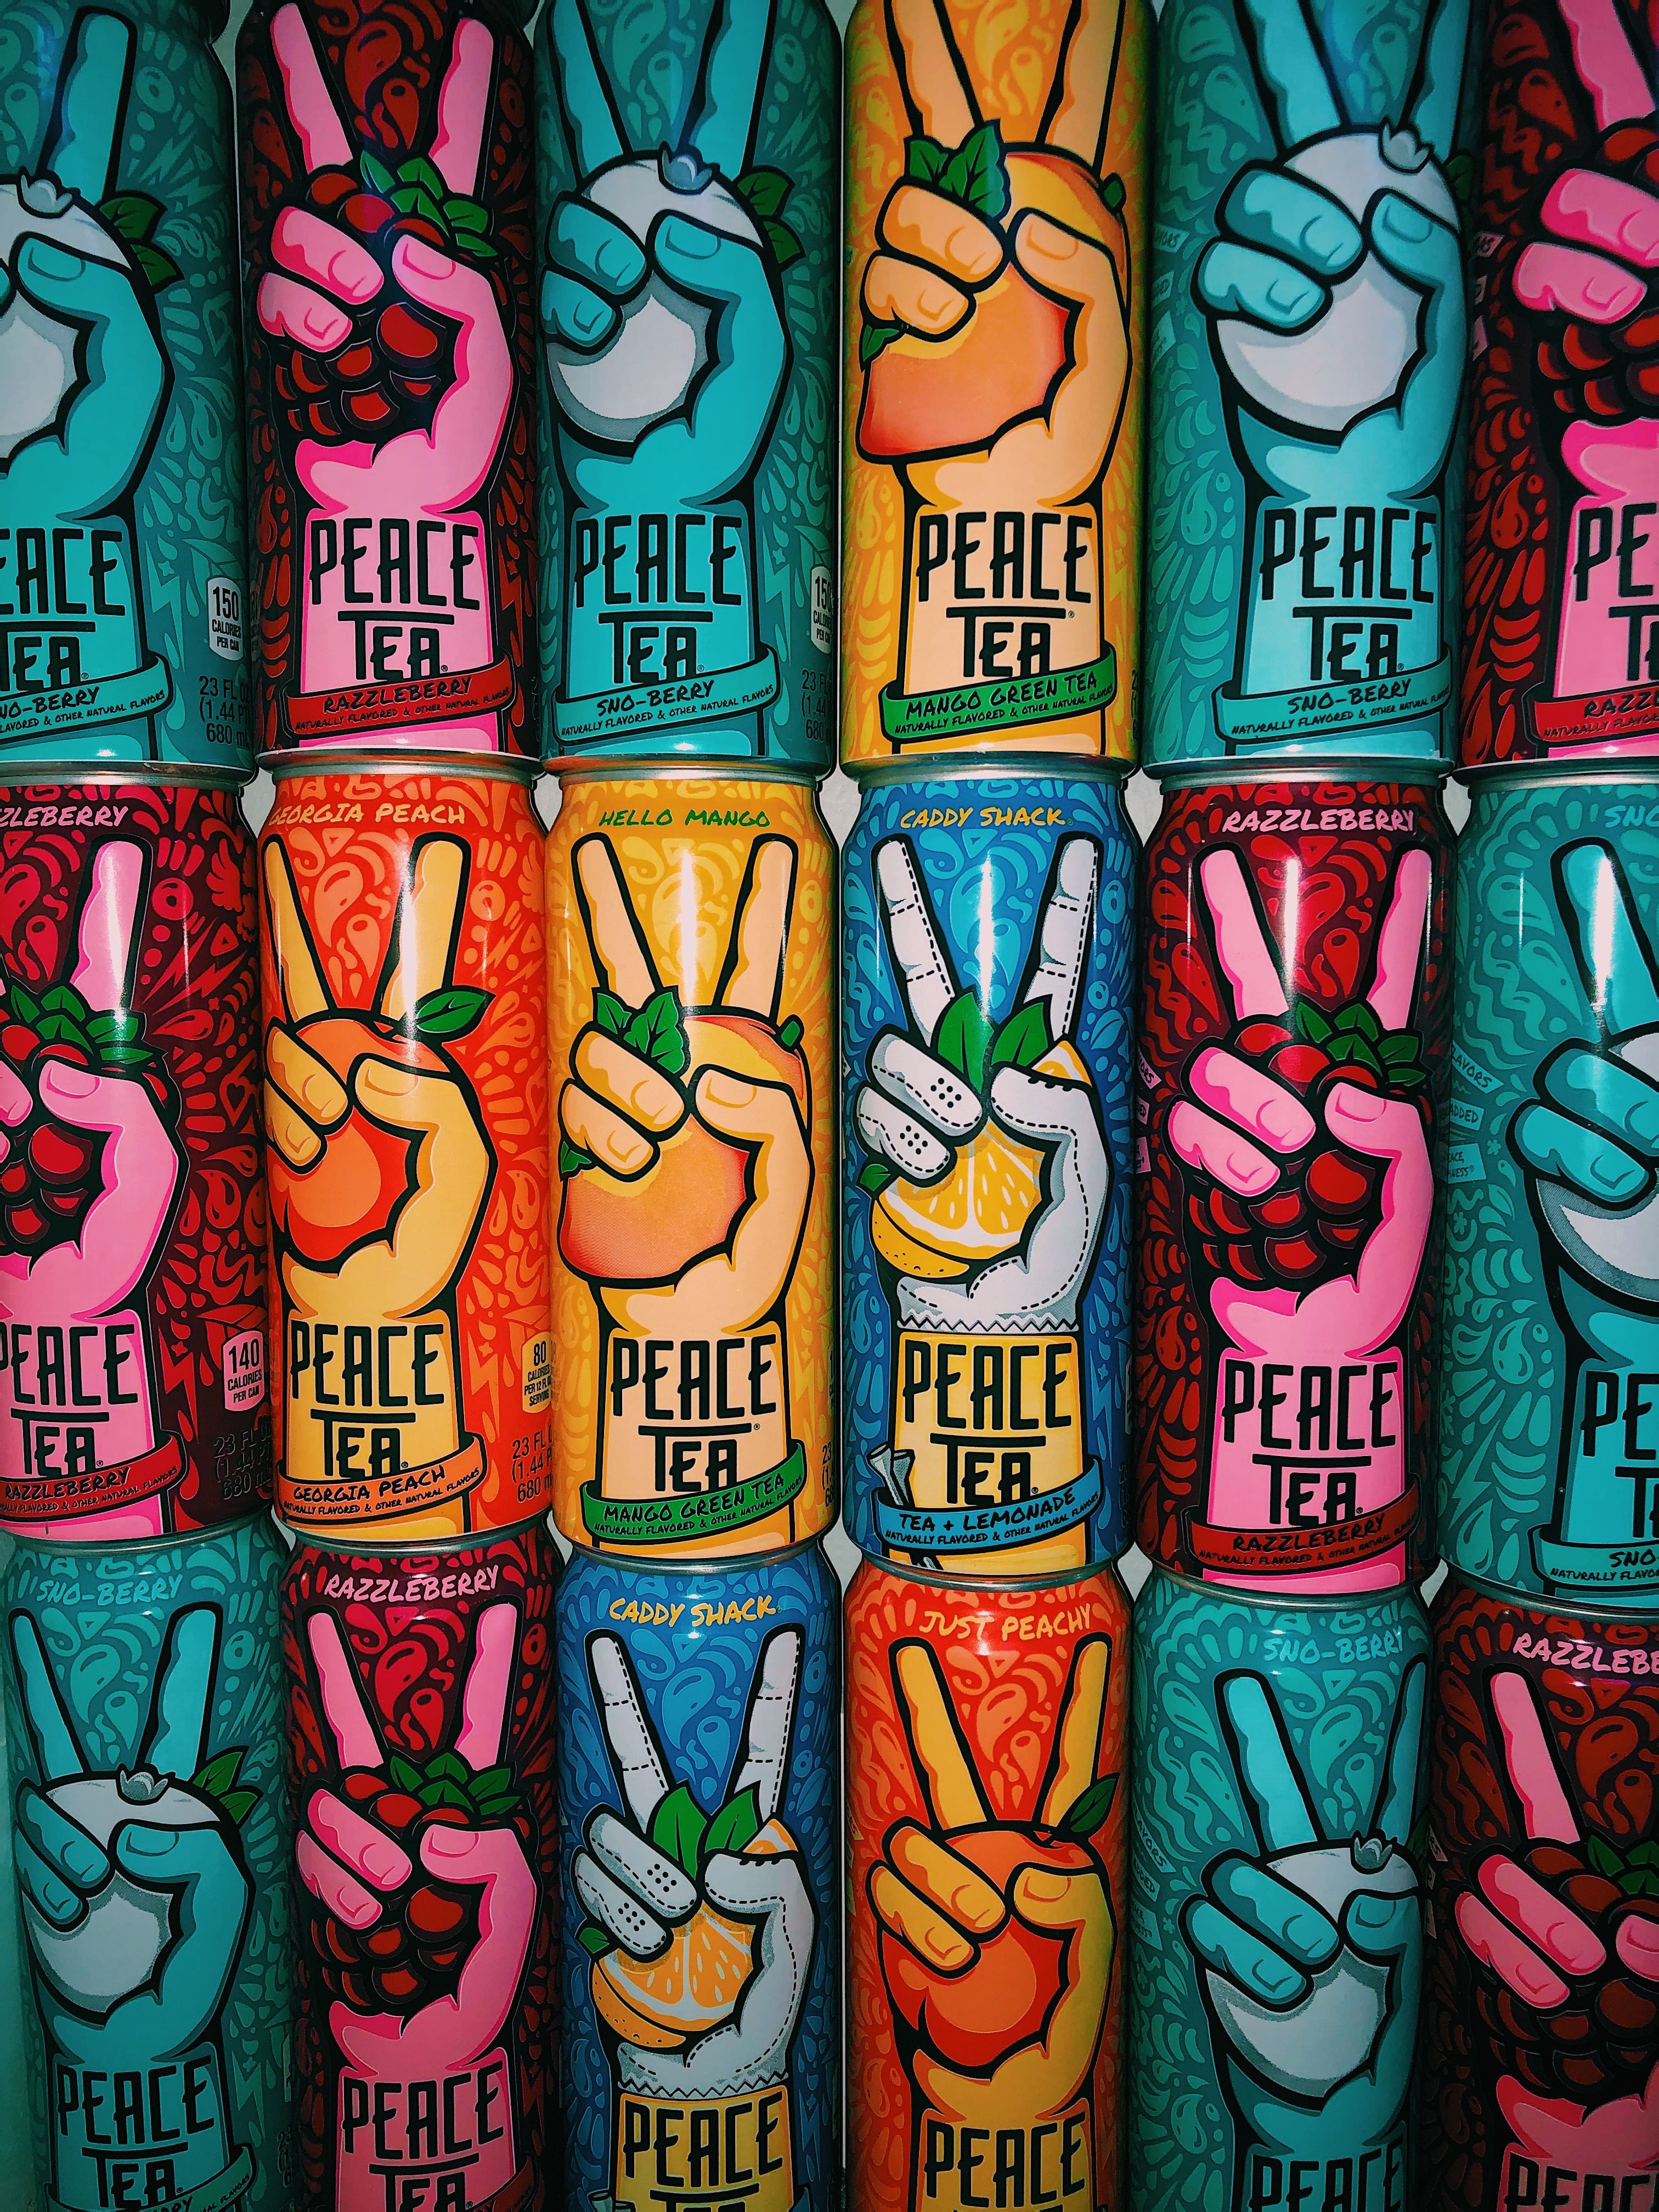 Peace Tea cans stacked on top of each other - Peace